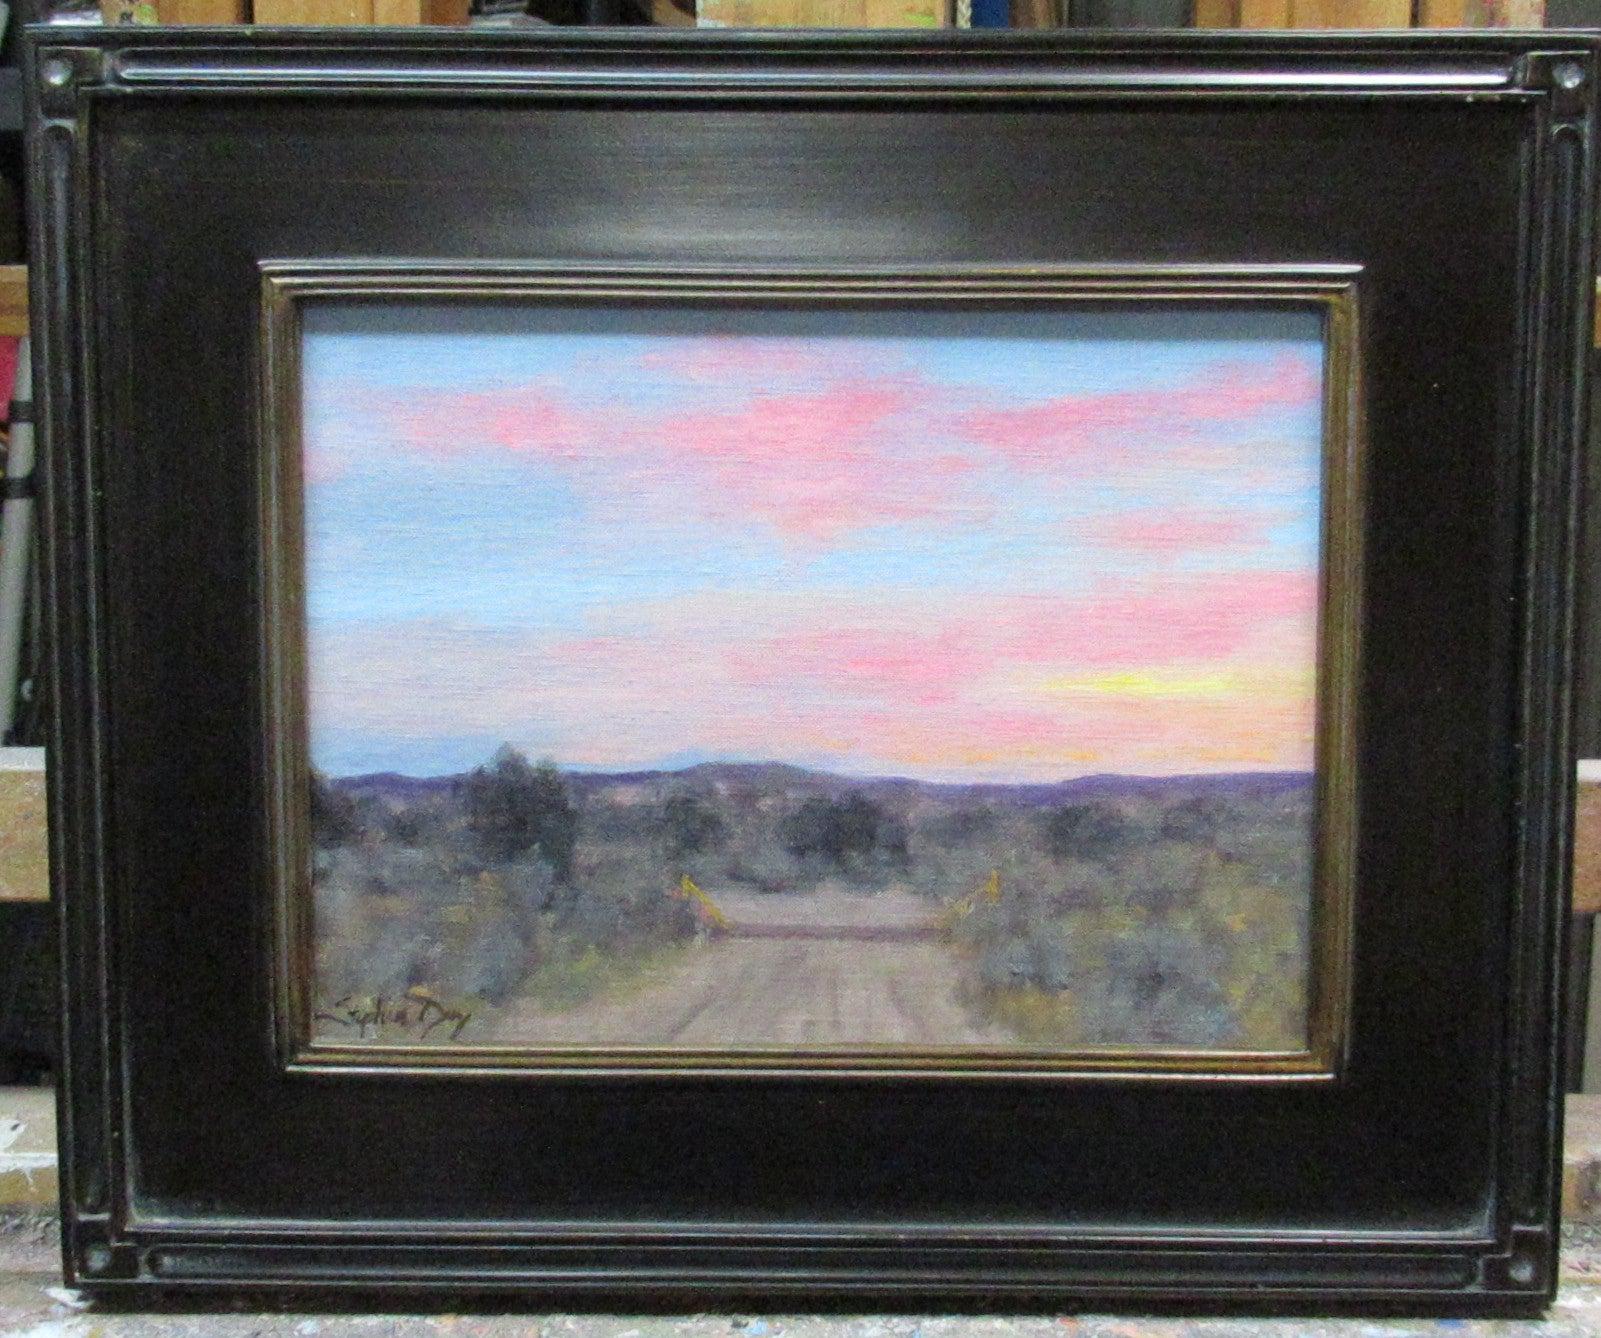 At the Gate-Painting-Stephen Day-Sorrel Sky Gallery